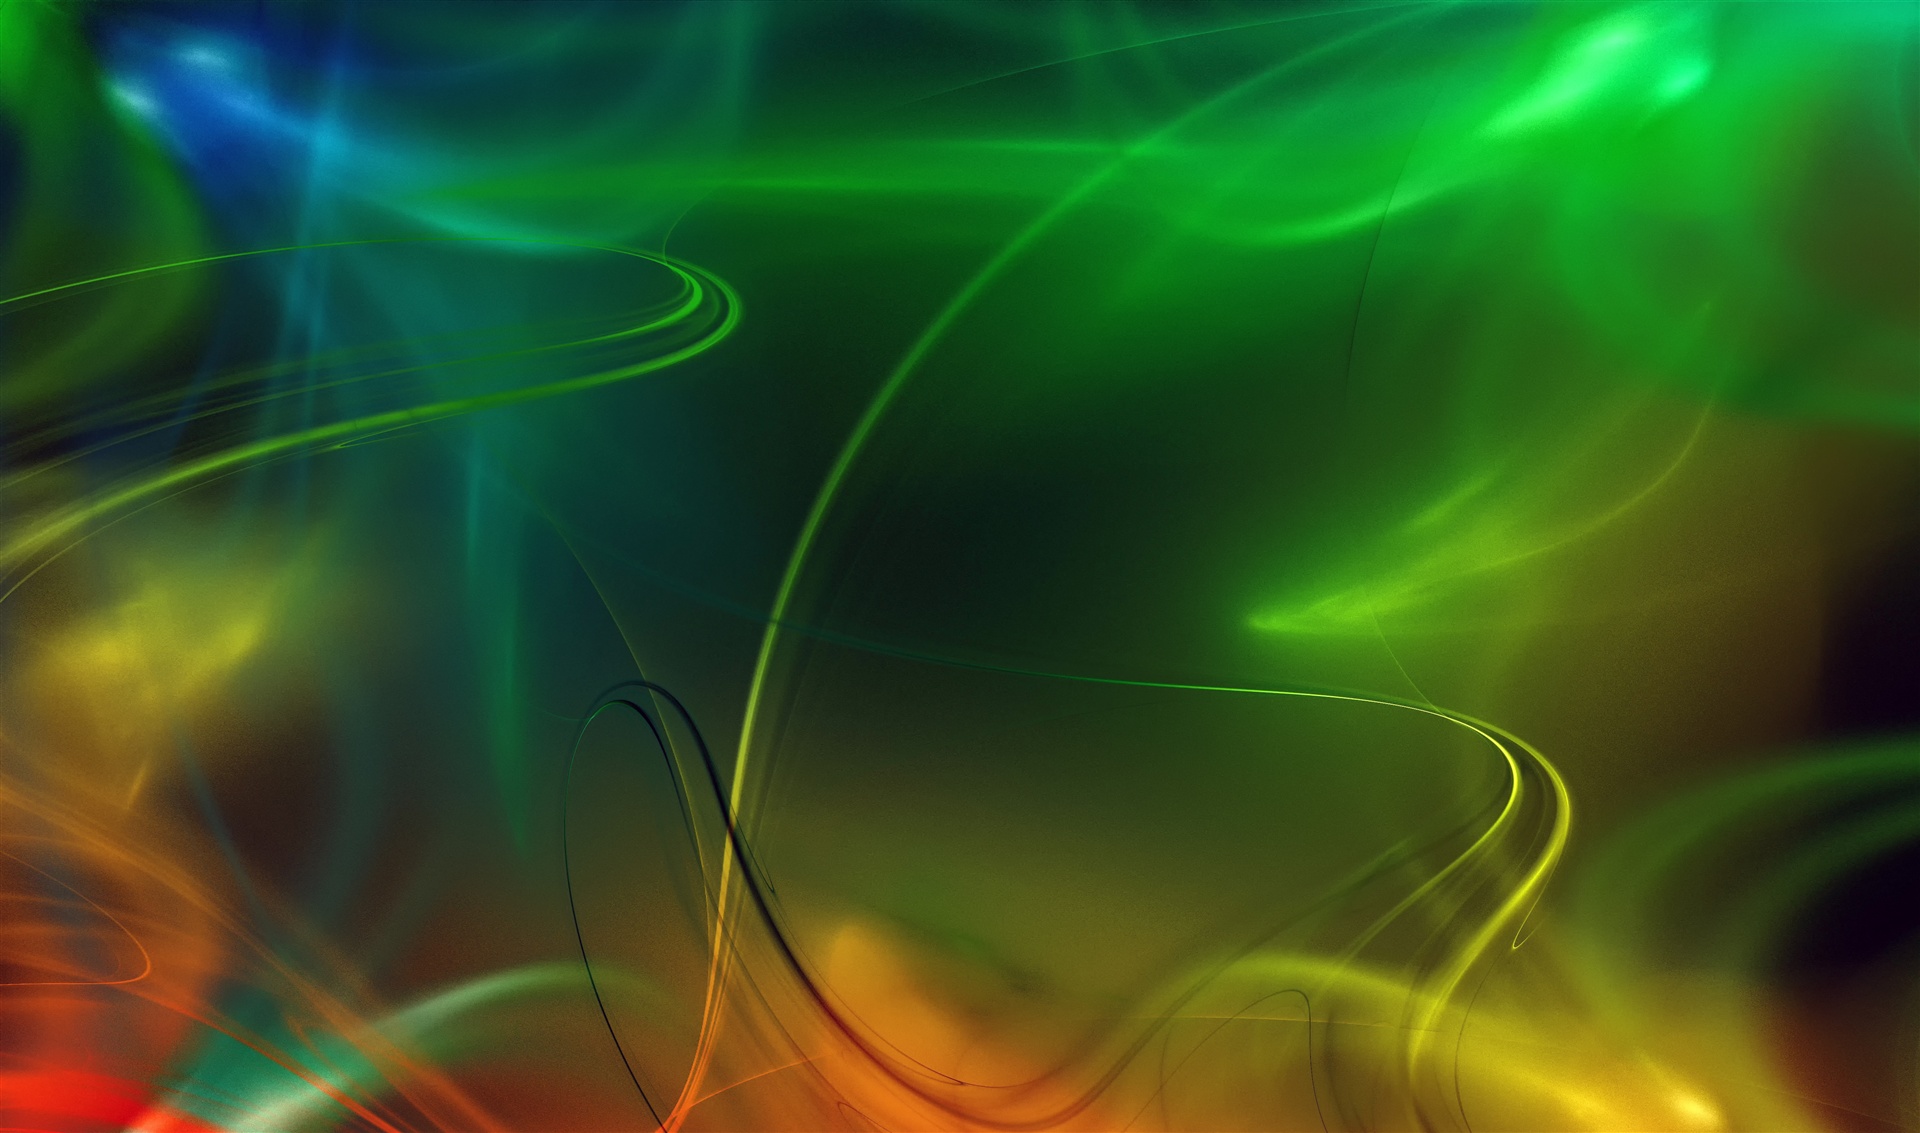 4k Wallpaper Abstraction Line The Light Band